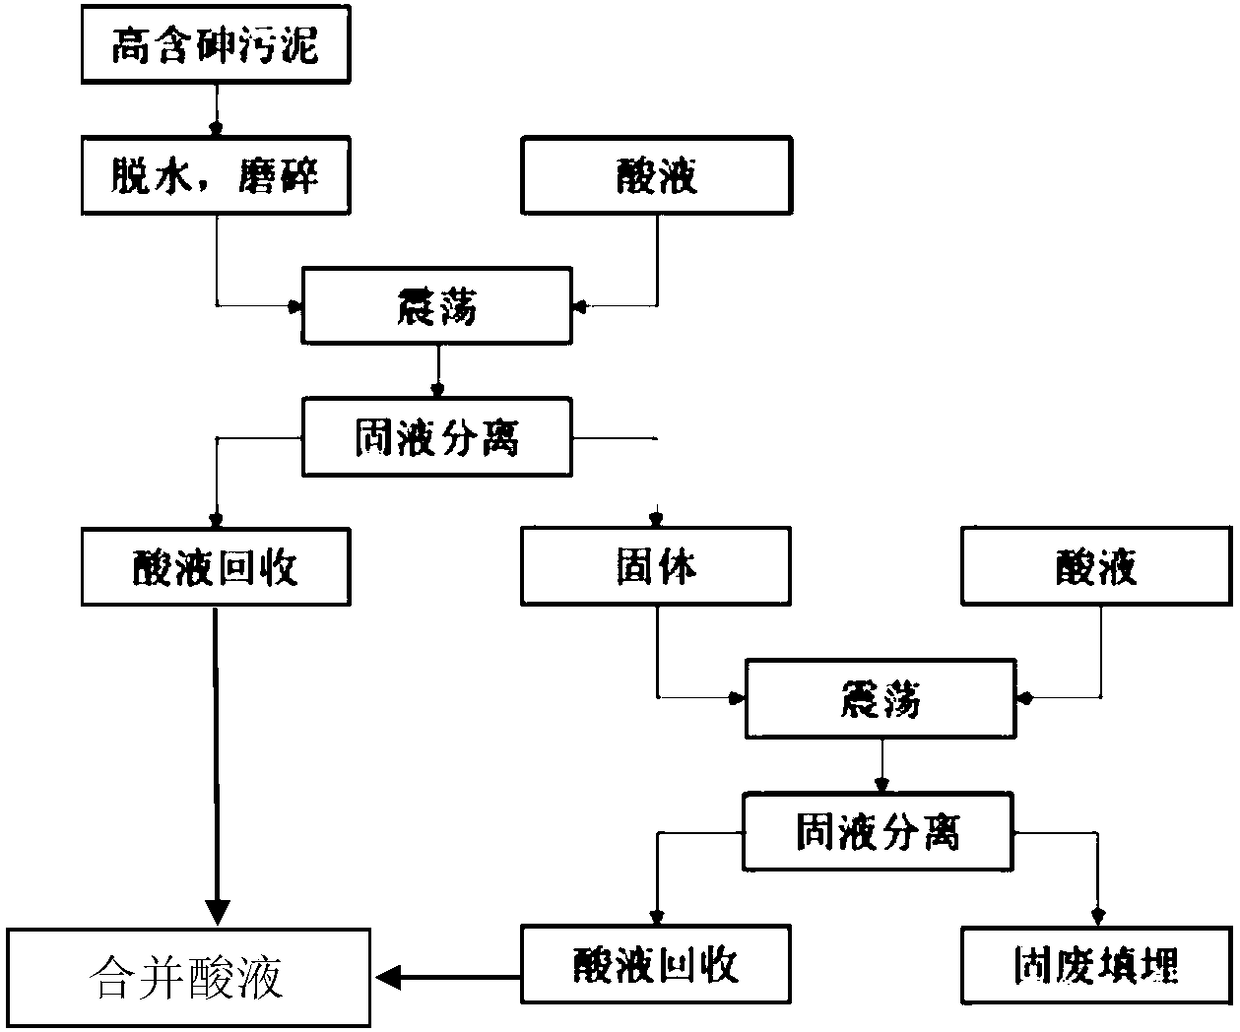 High-arsenic-content metallurgical sludge harmless treatment method and arsenic recovery method